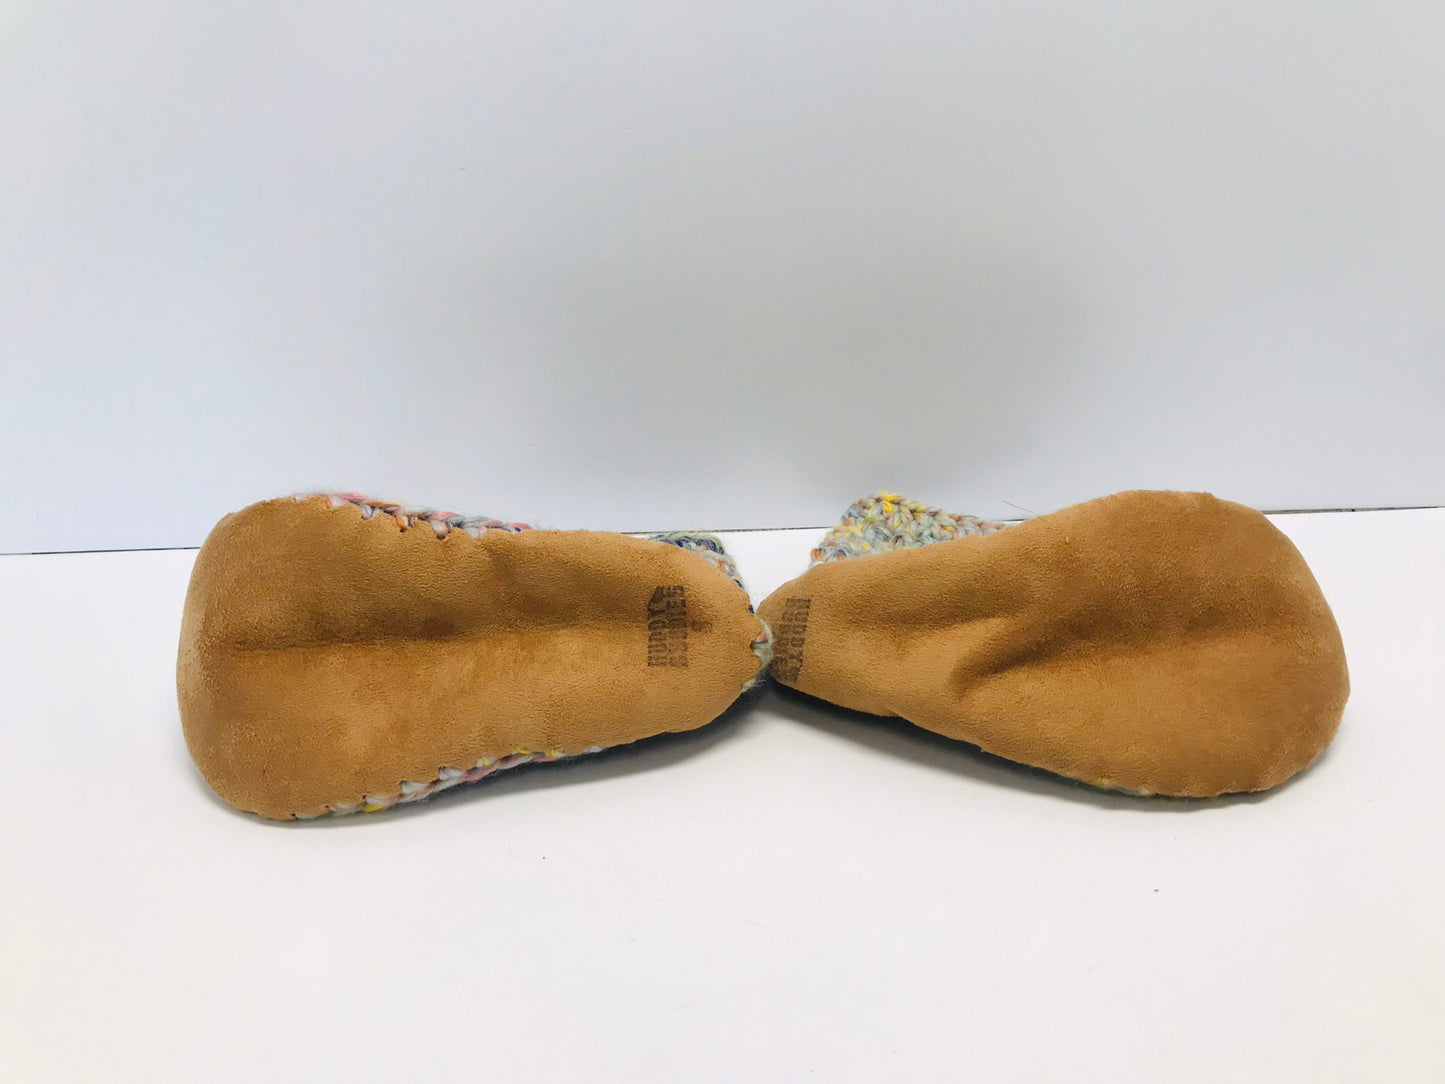 Ladies Size 6 Moccasin Slippers Huddy Buddies Padraig Style Wool Slippers  Plush Faux Fur Inside Faux Suade Outside New Never Worn